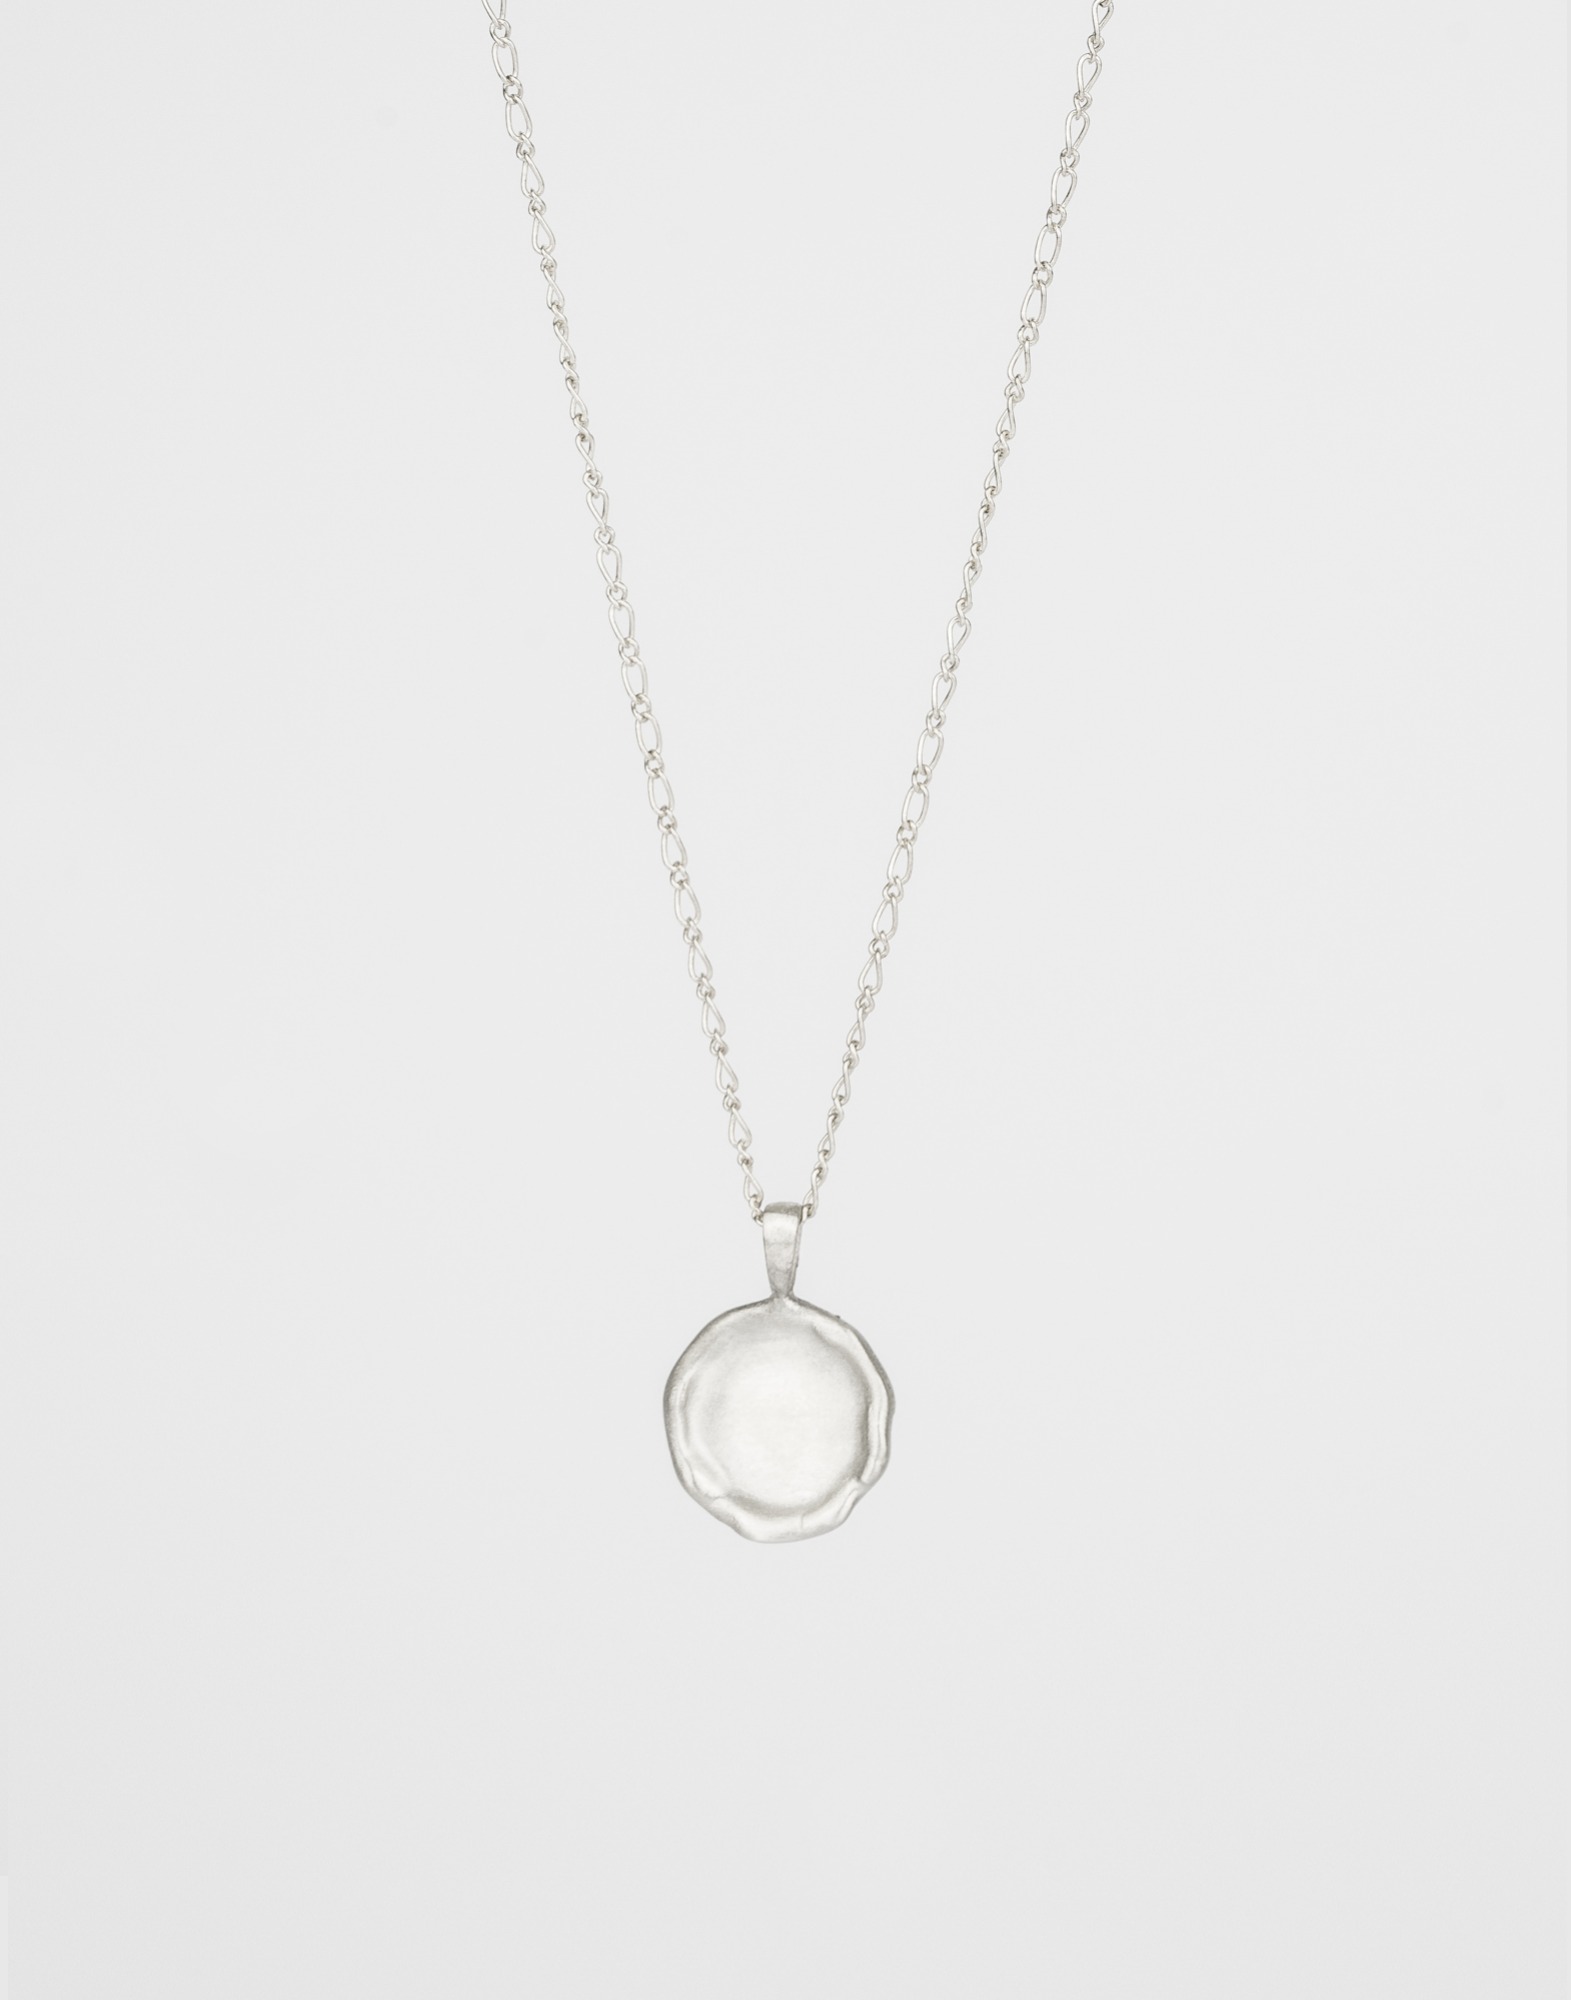 925 Silver base round necklace